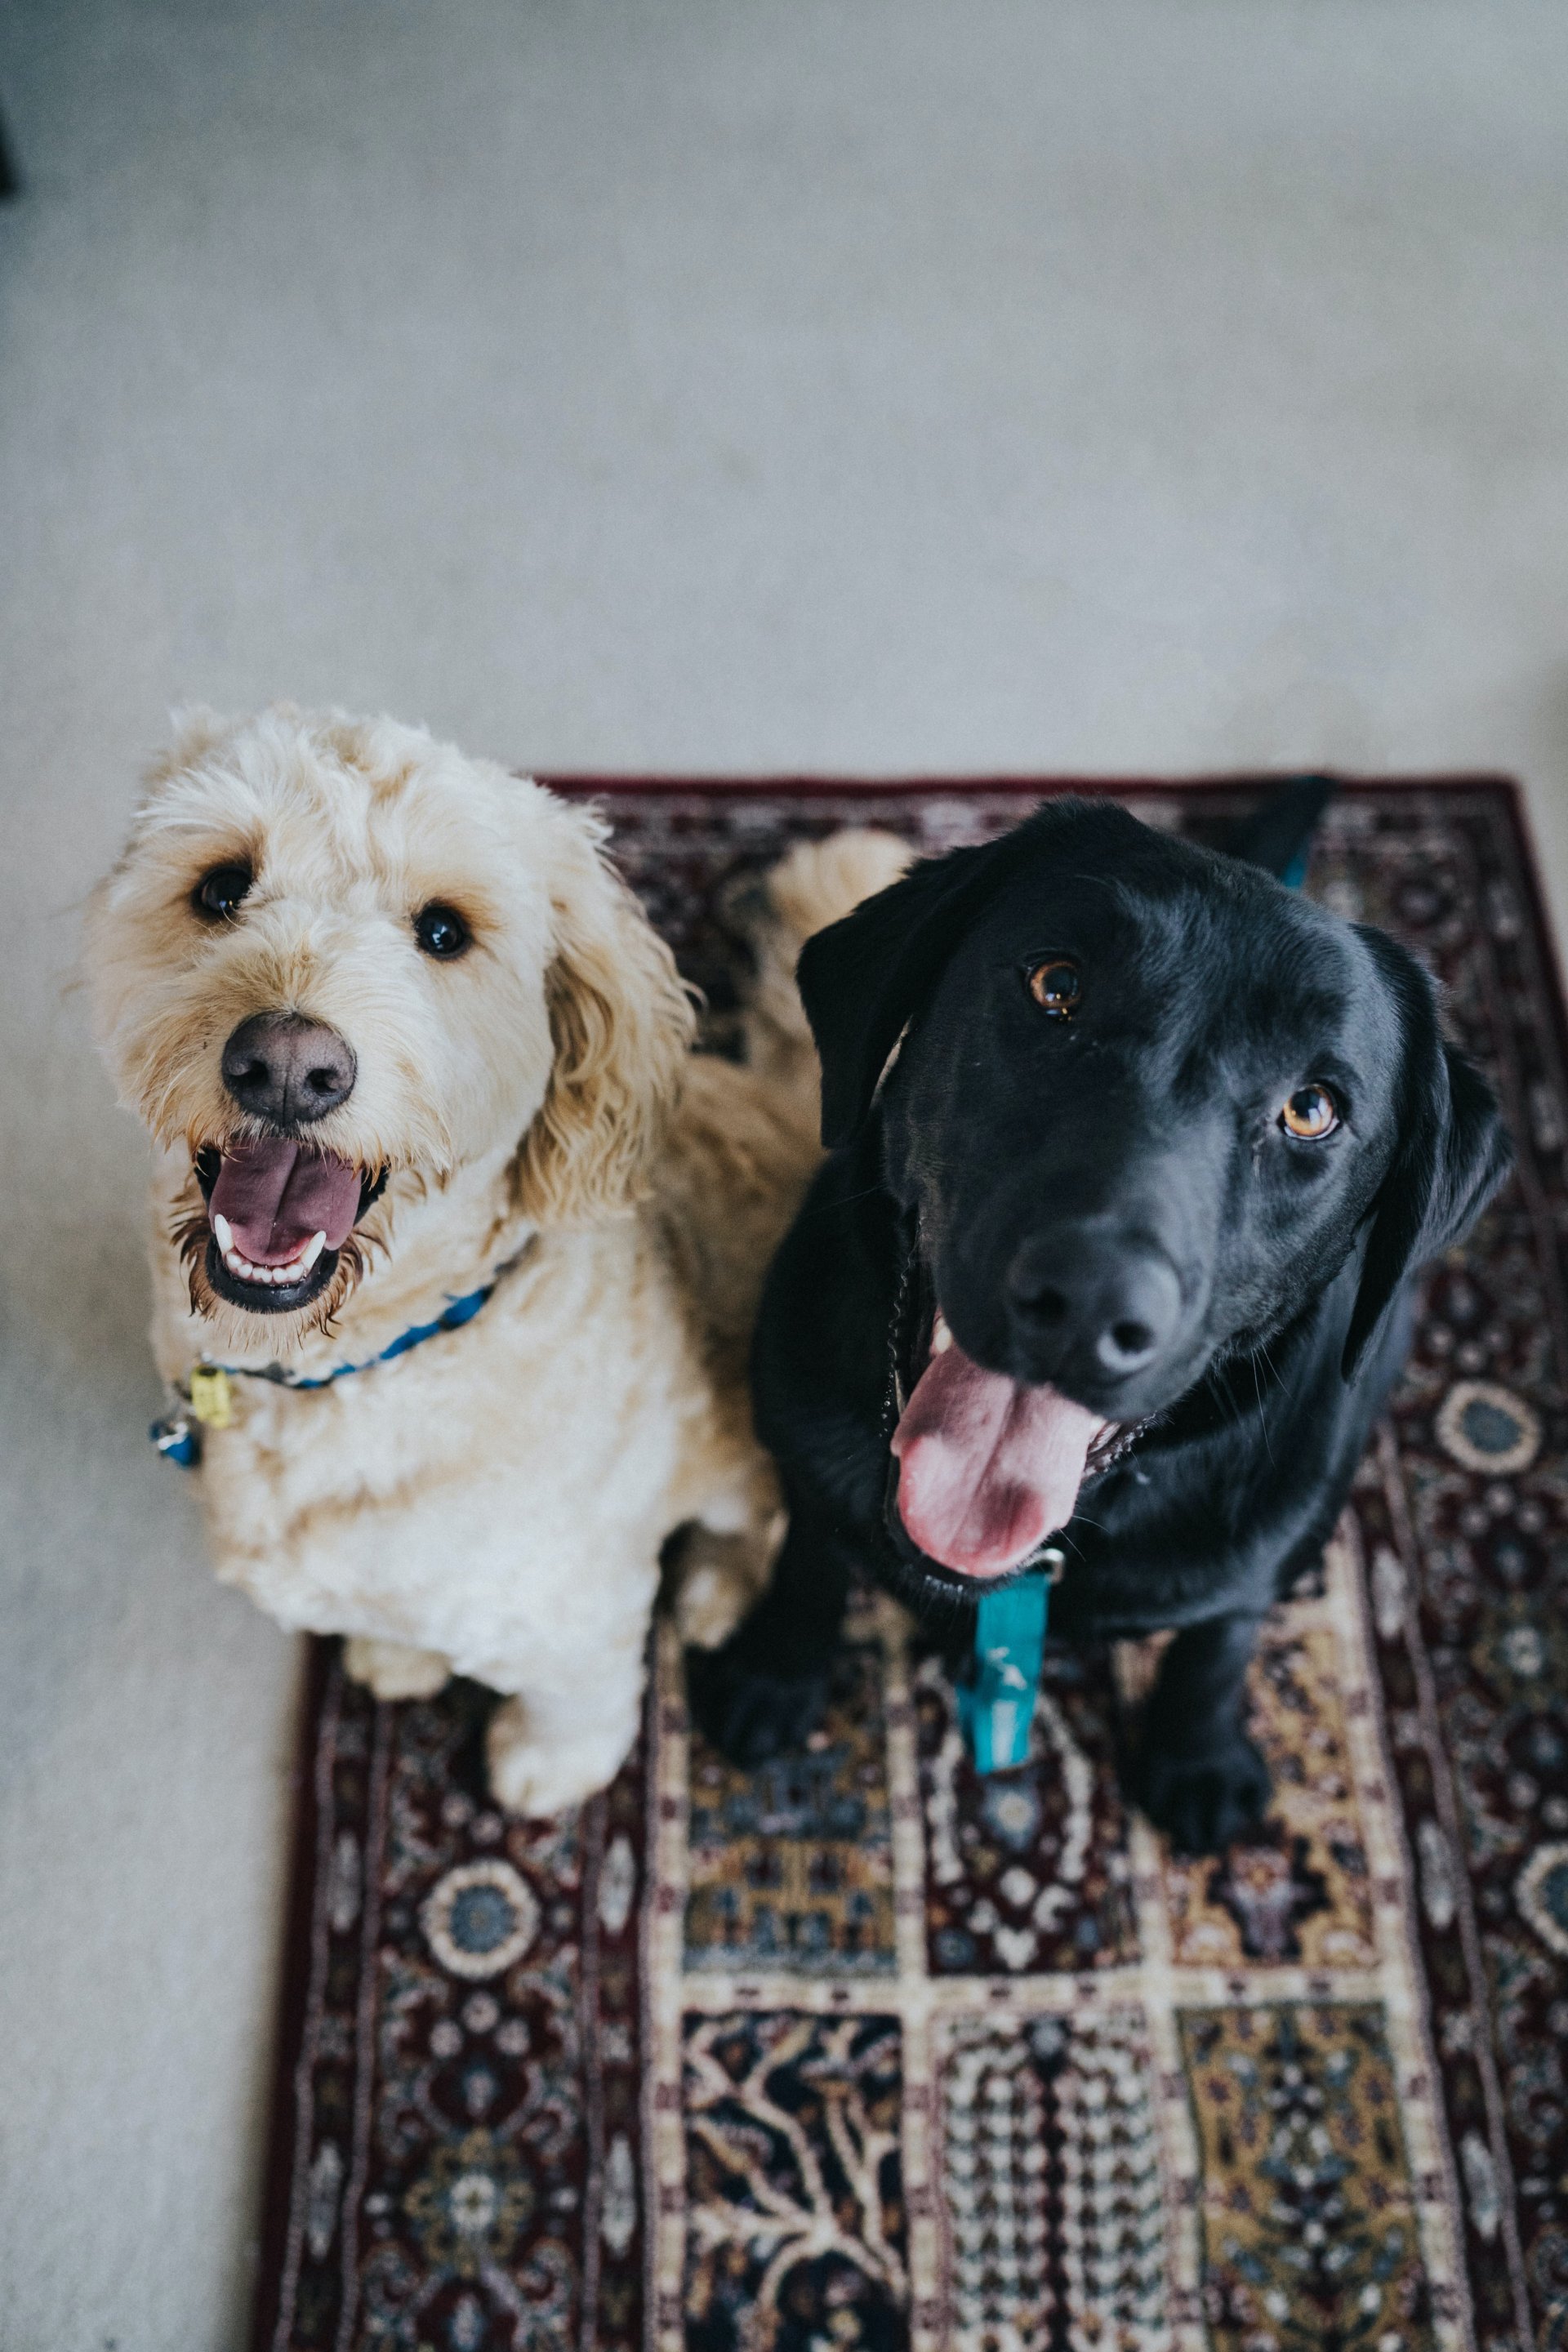 Things to remember when your 2 dogs meet